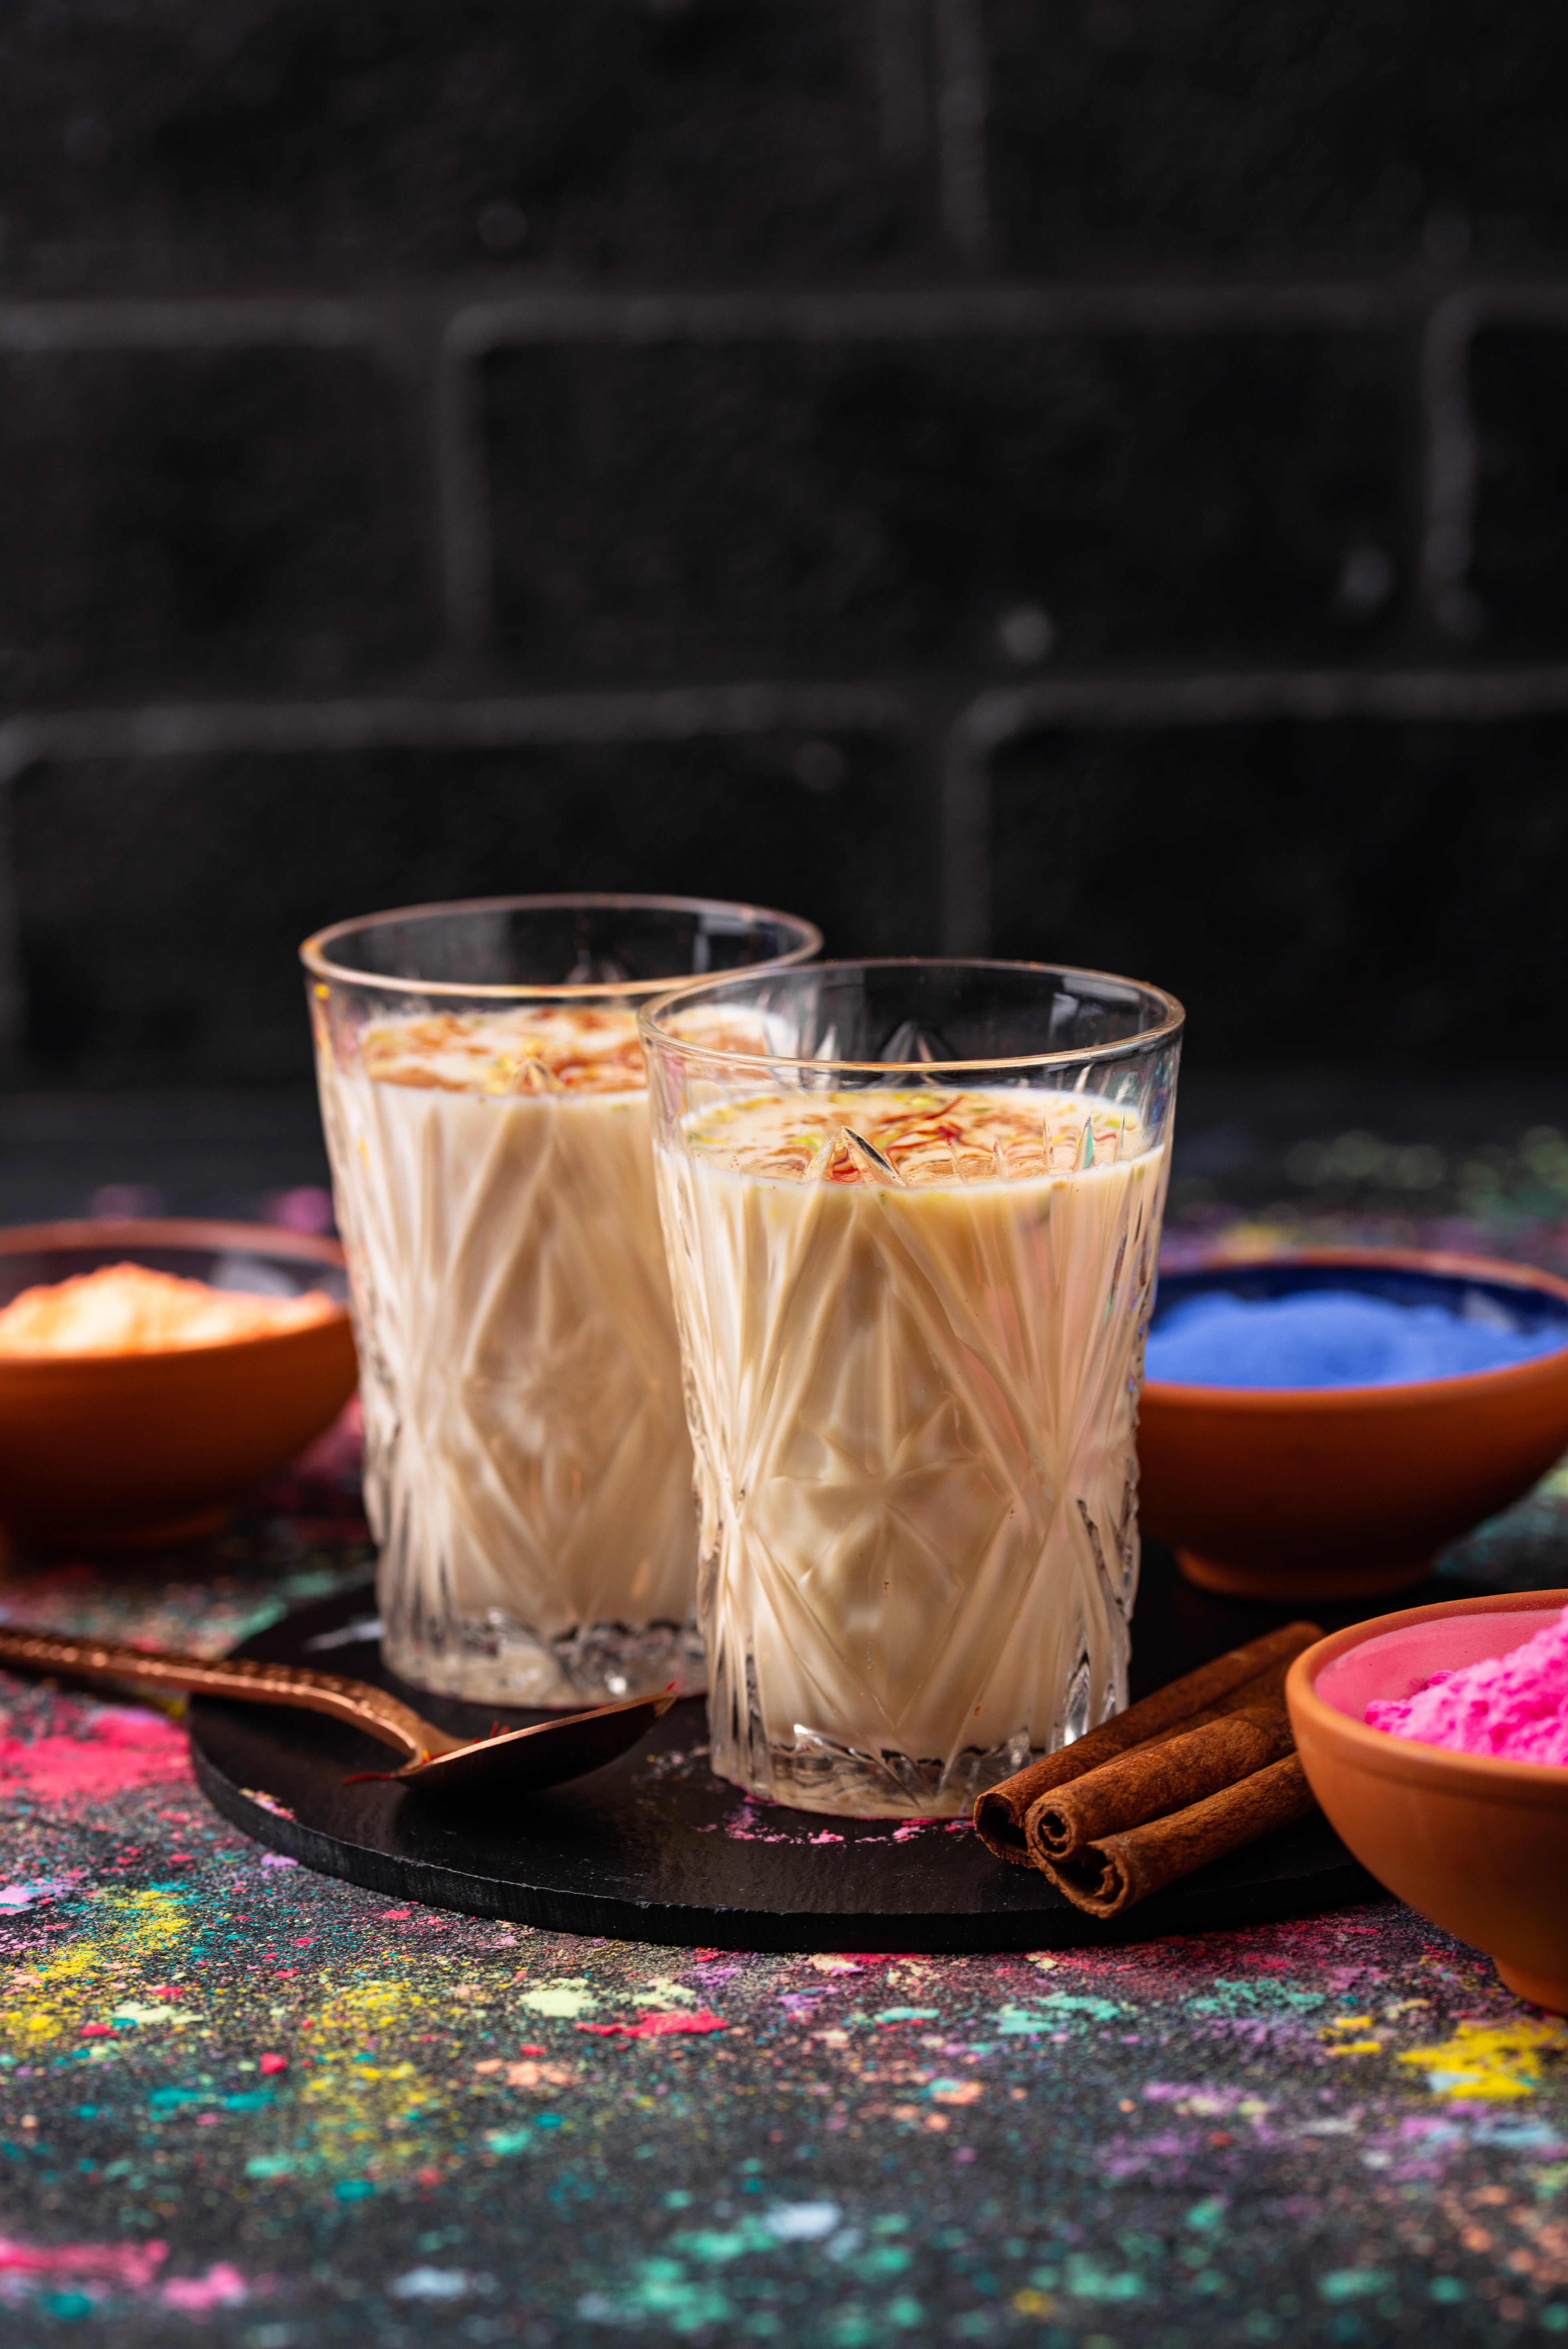 The quintessential Holi drink